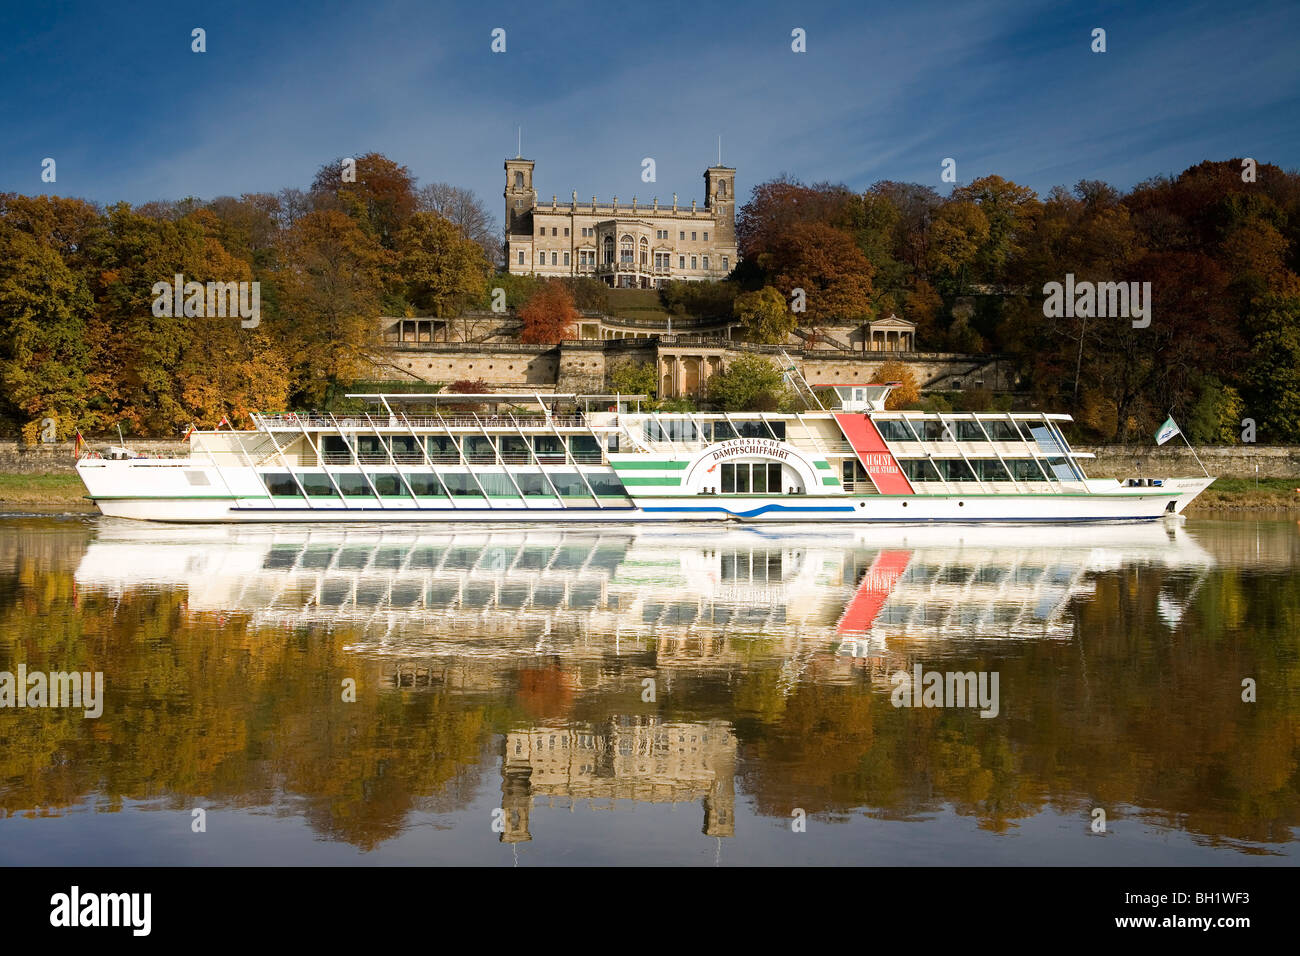 Schloss Albrechtsberg on the banks of the river Elbe, Dresden, Saxony, Germany, Europe Stock Photo